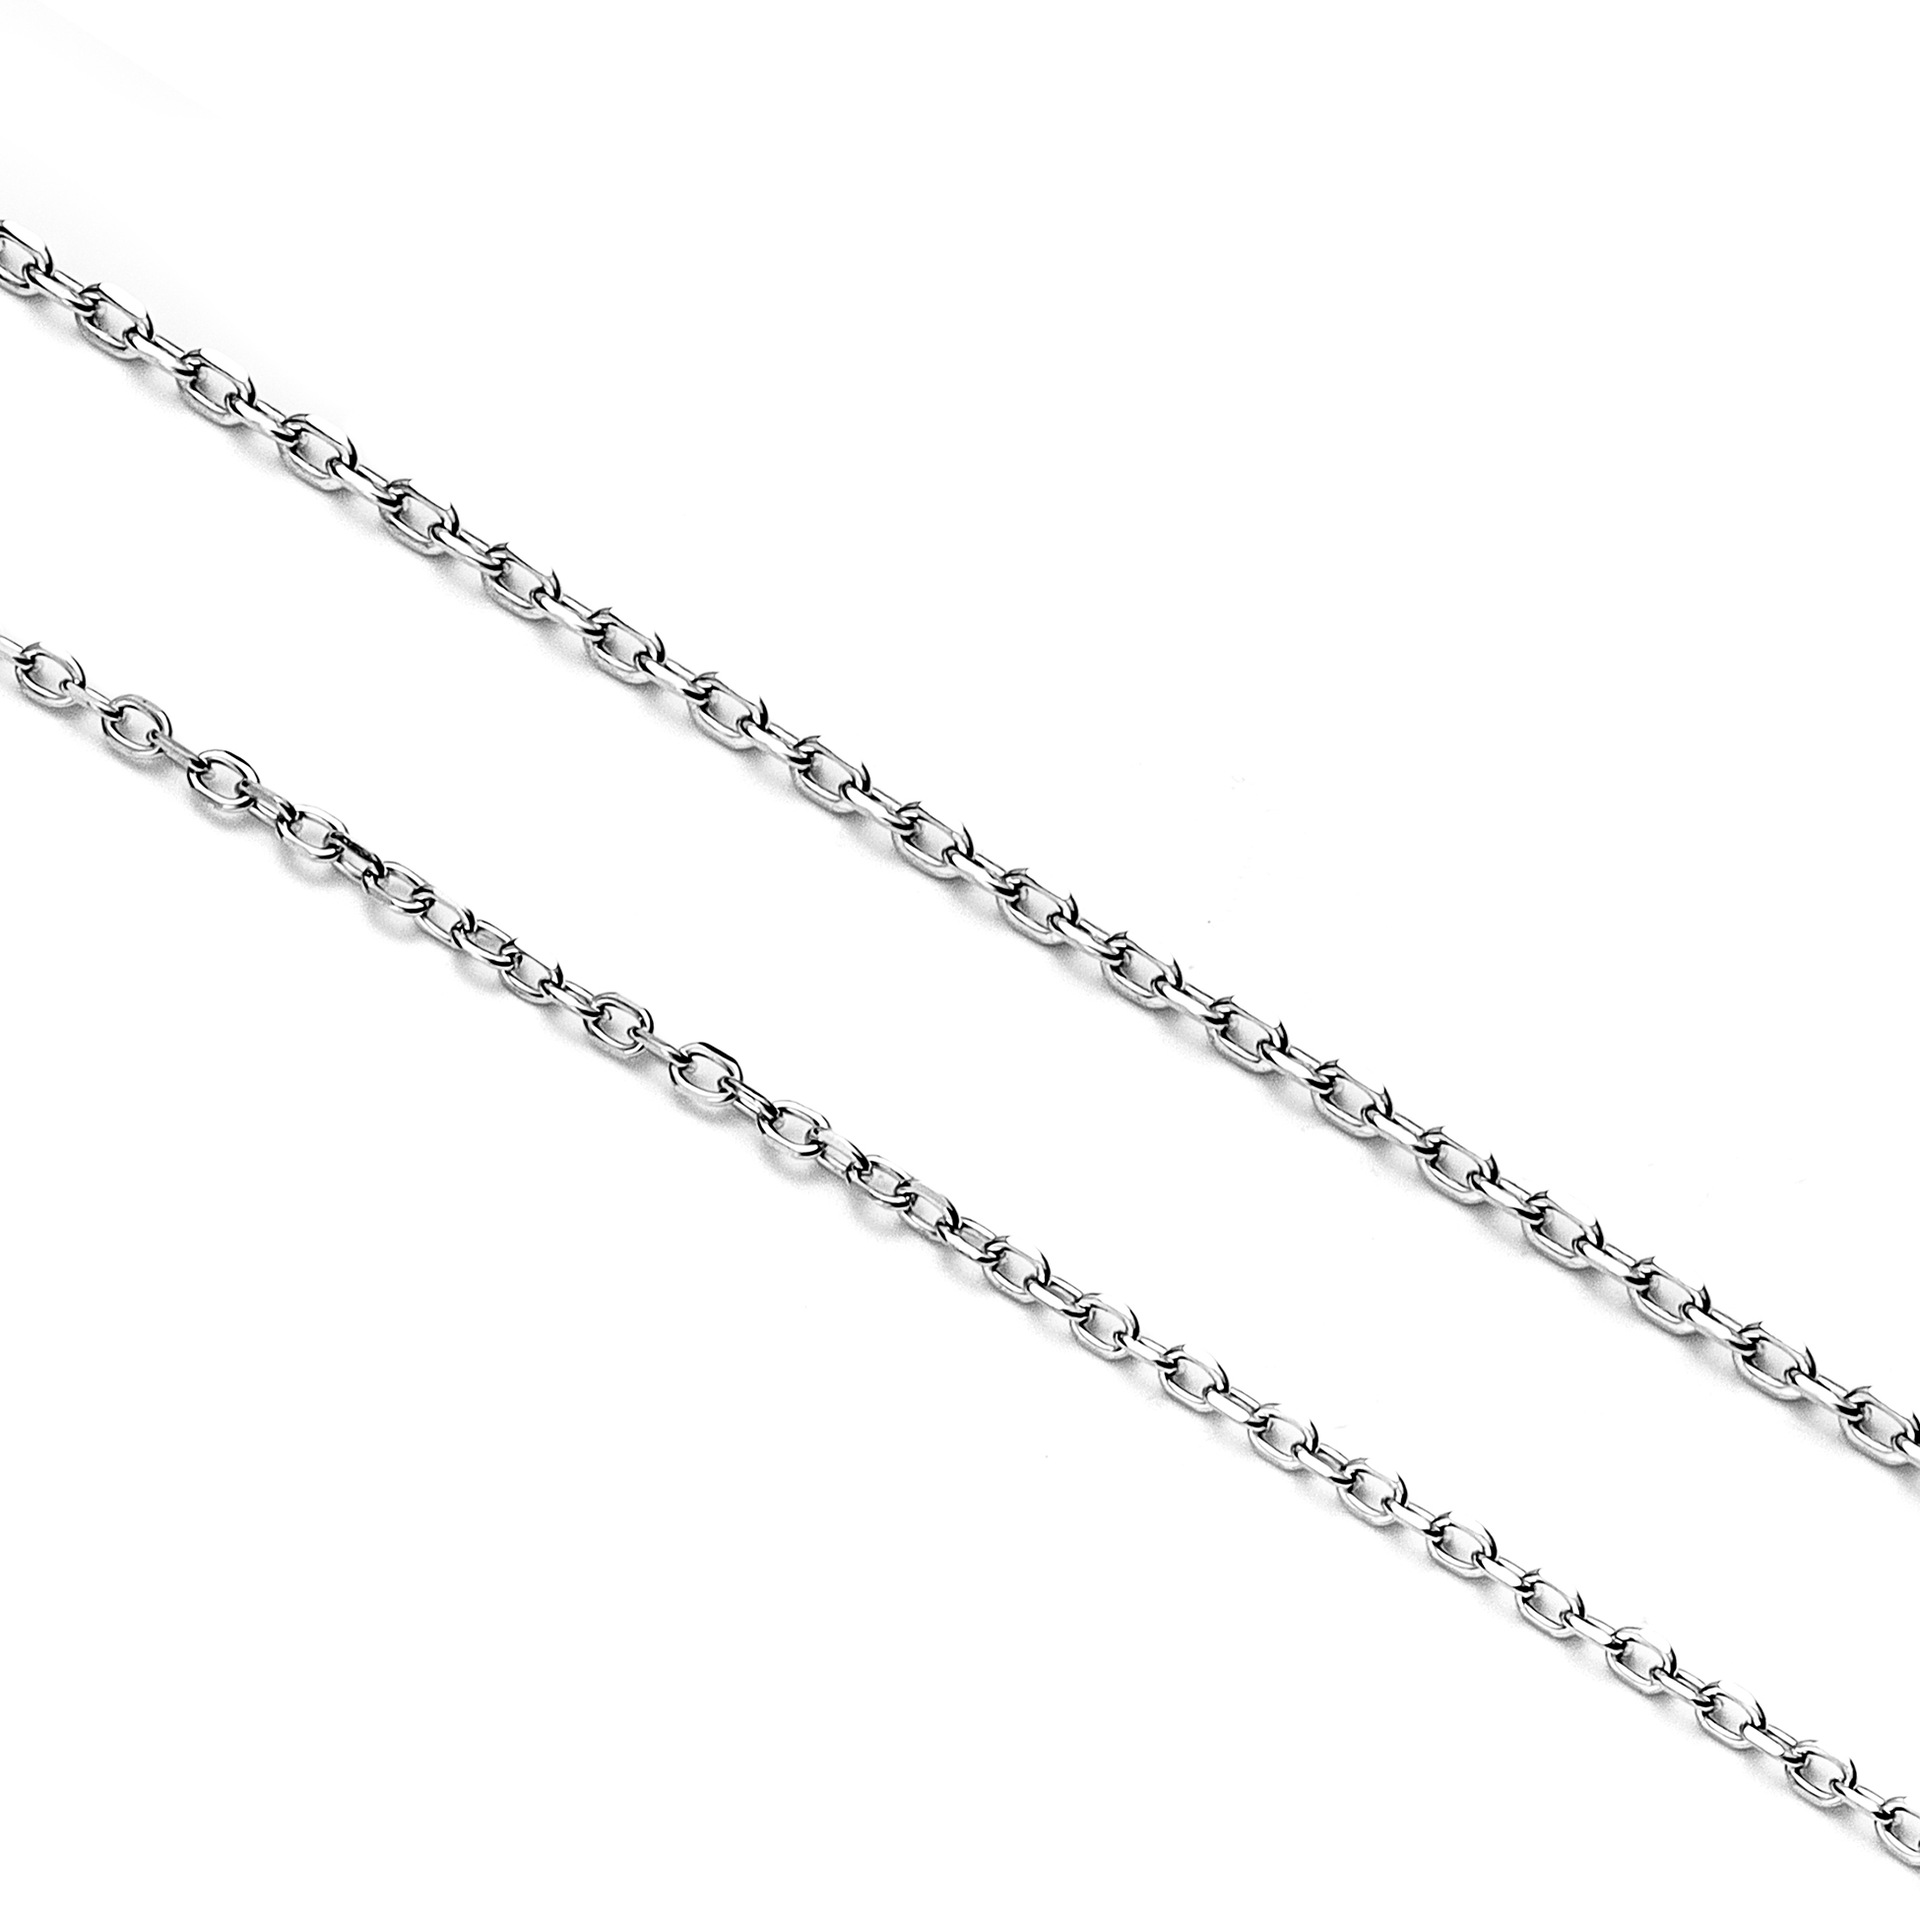 S999 Sterling Silver Necklace for Women Cross Chain Shiny O-Type Chain Gypsophila Chain Chopin Chain Light Luxury High-Grade Pure Silver Clavicle Chain